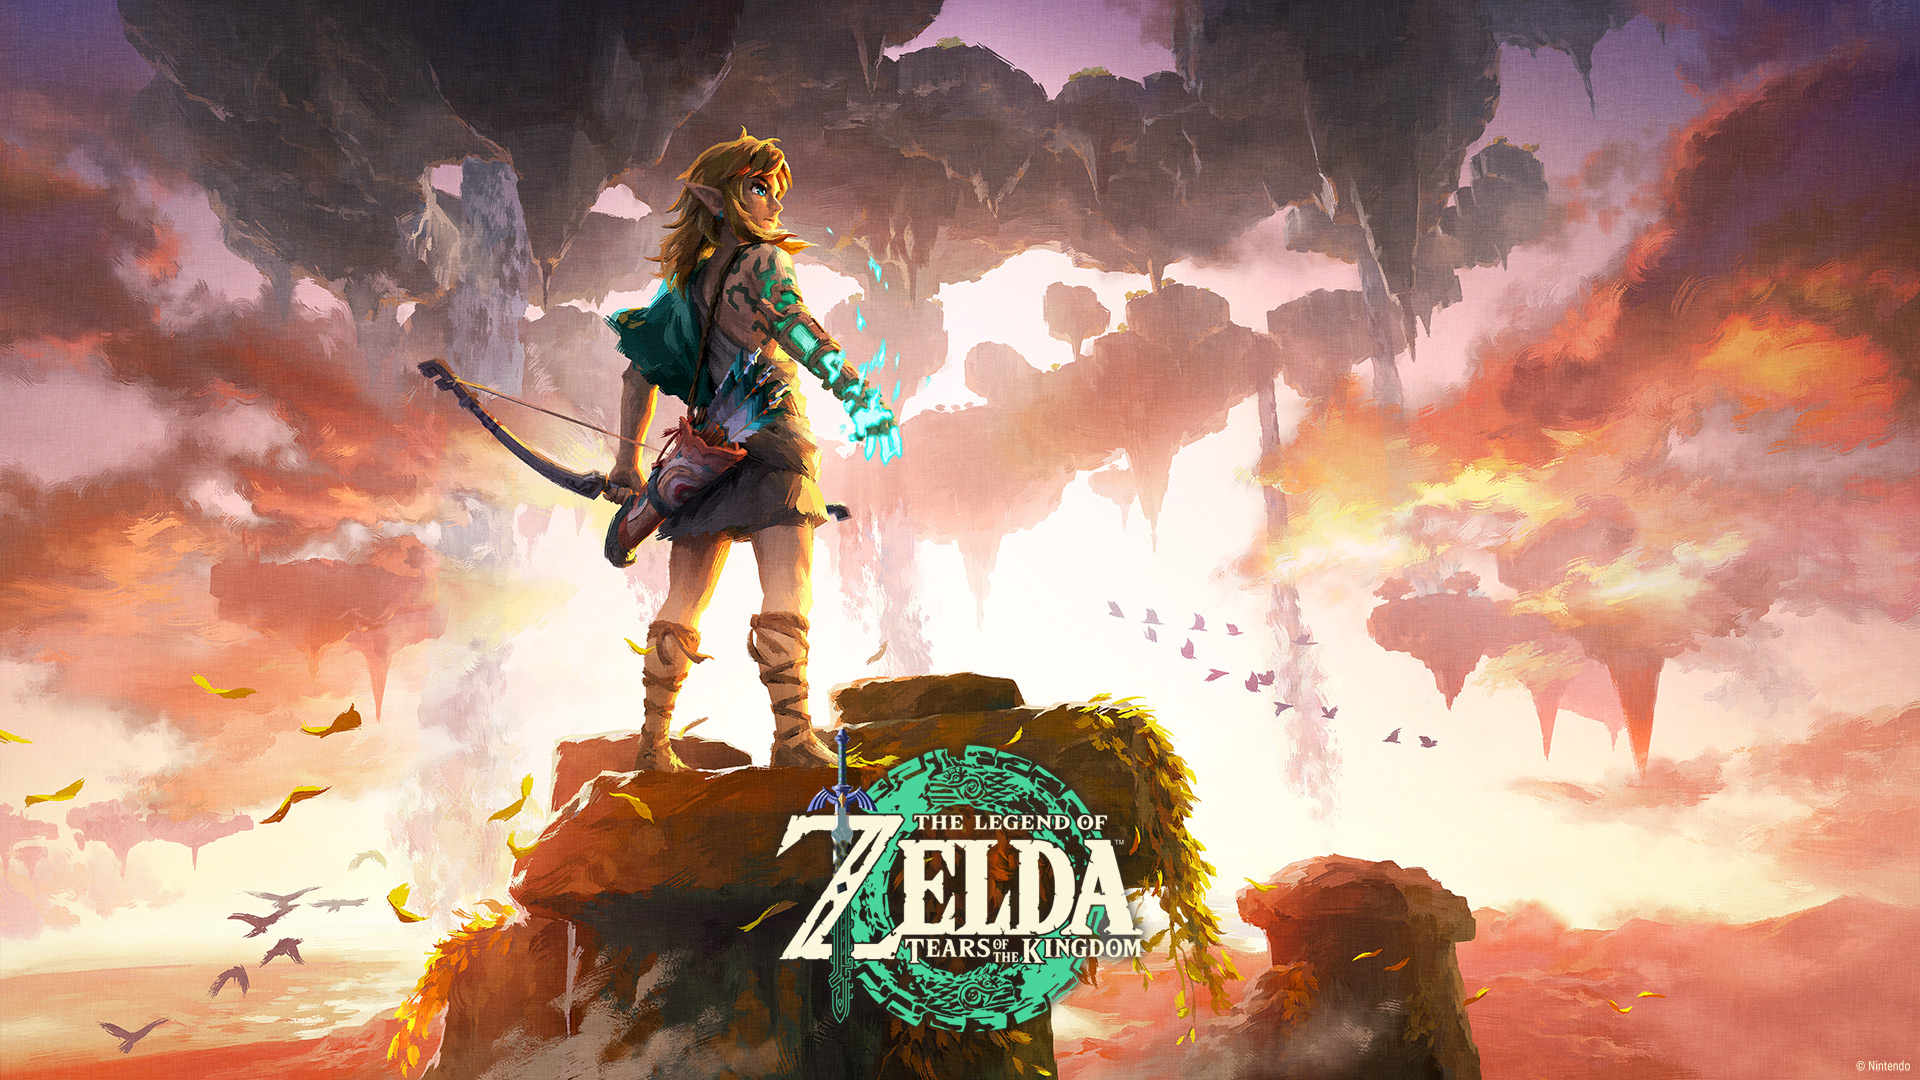 Hyrule Blog - The Zelda Blog: Replaying Ocarina of Time on the Wii U